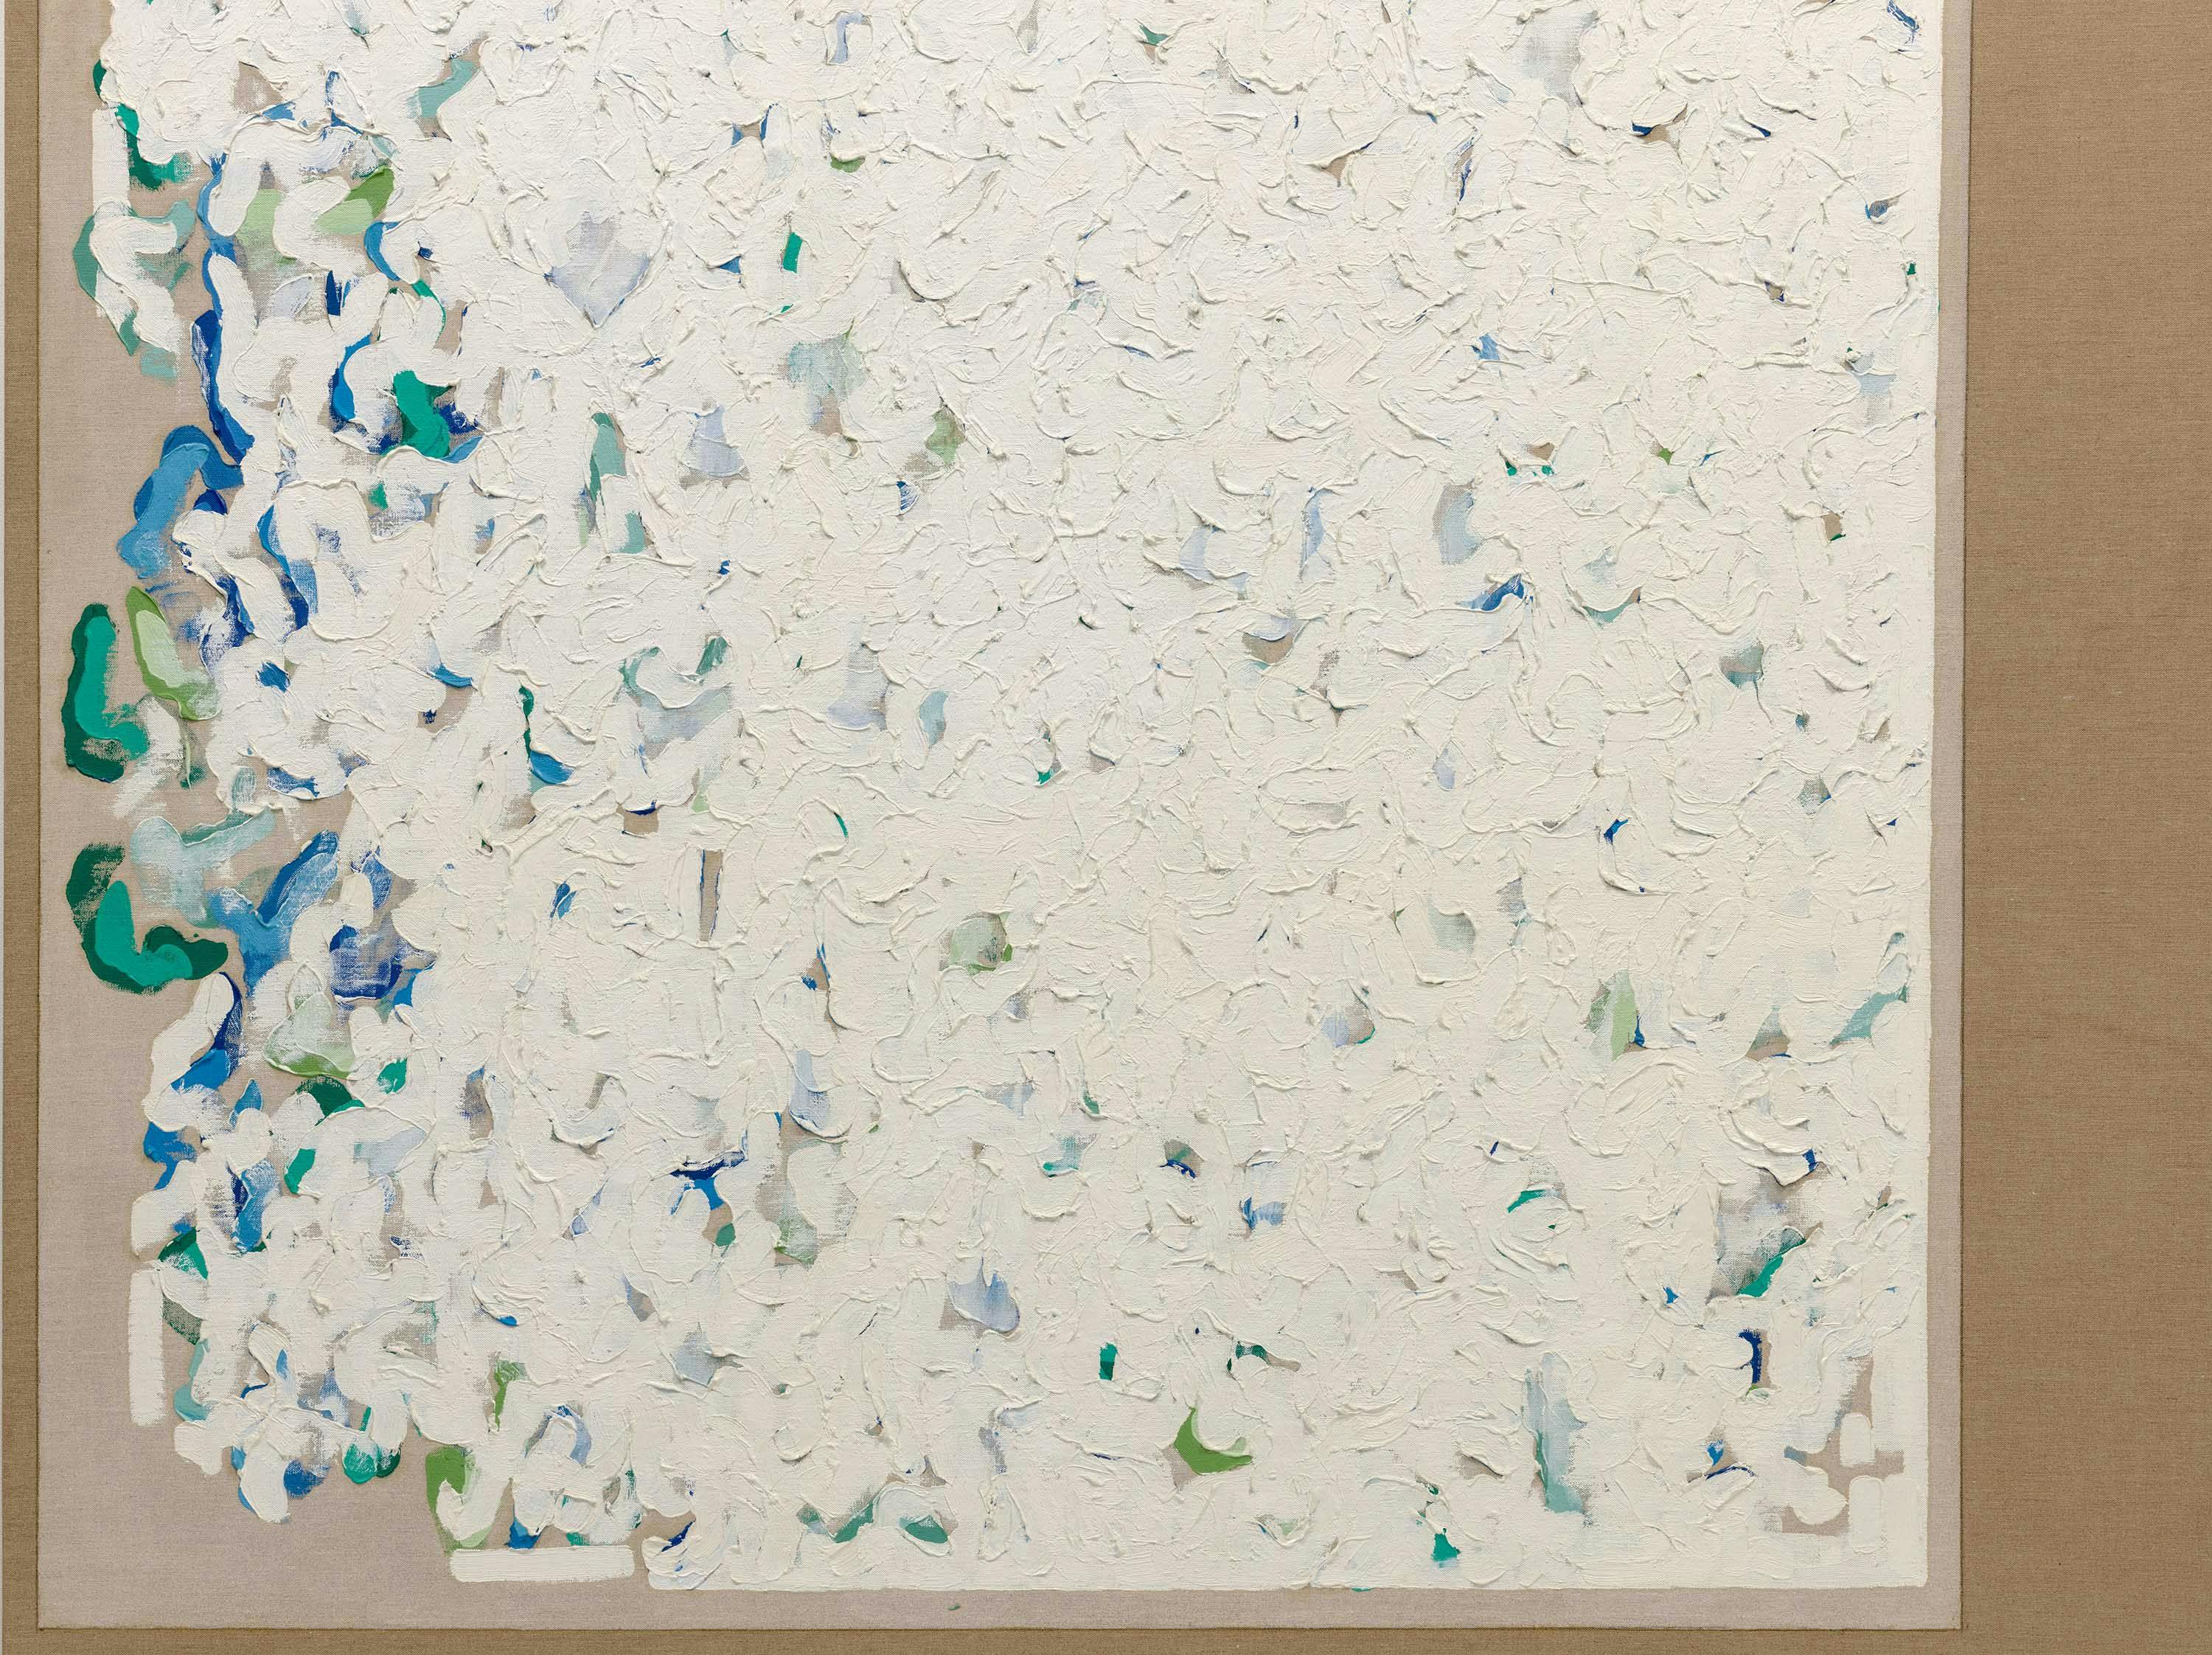 A detail from a painting by Robert Ryman, called Untitled, circa 1962.